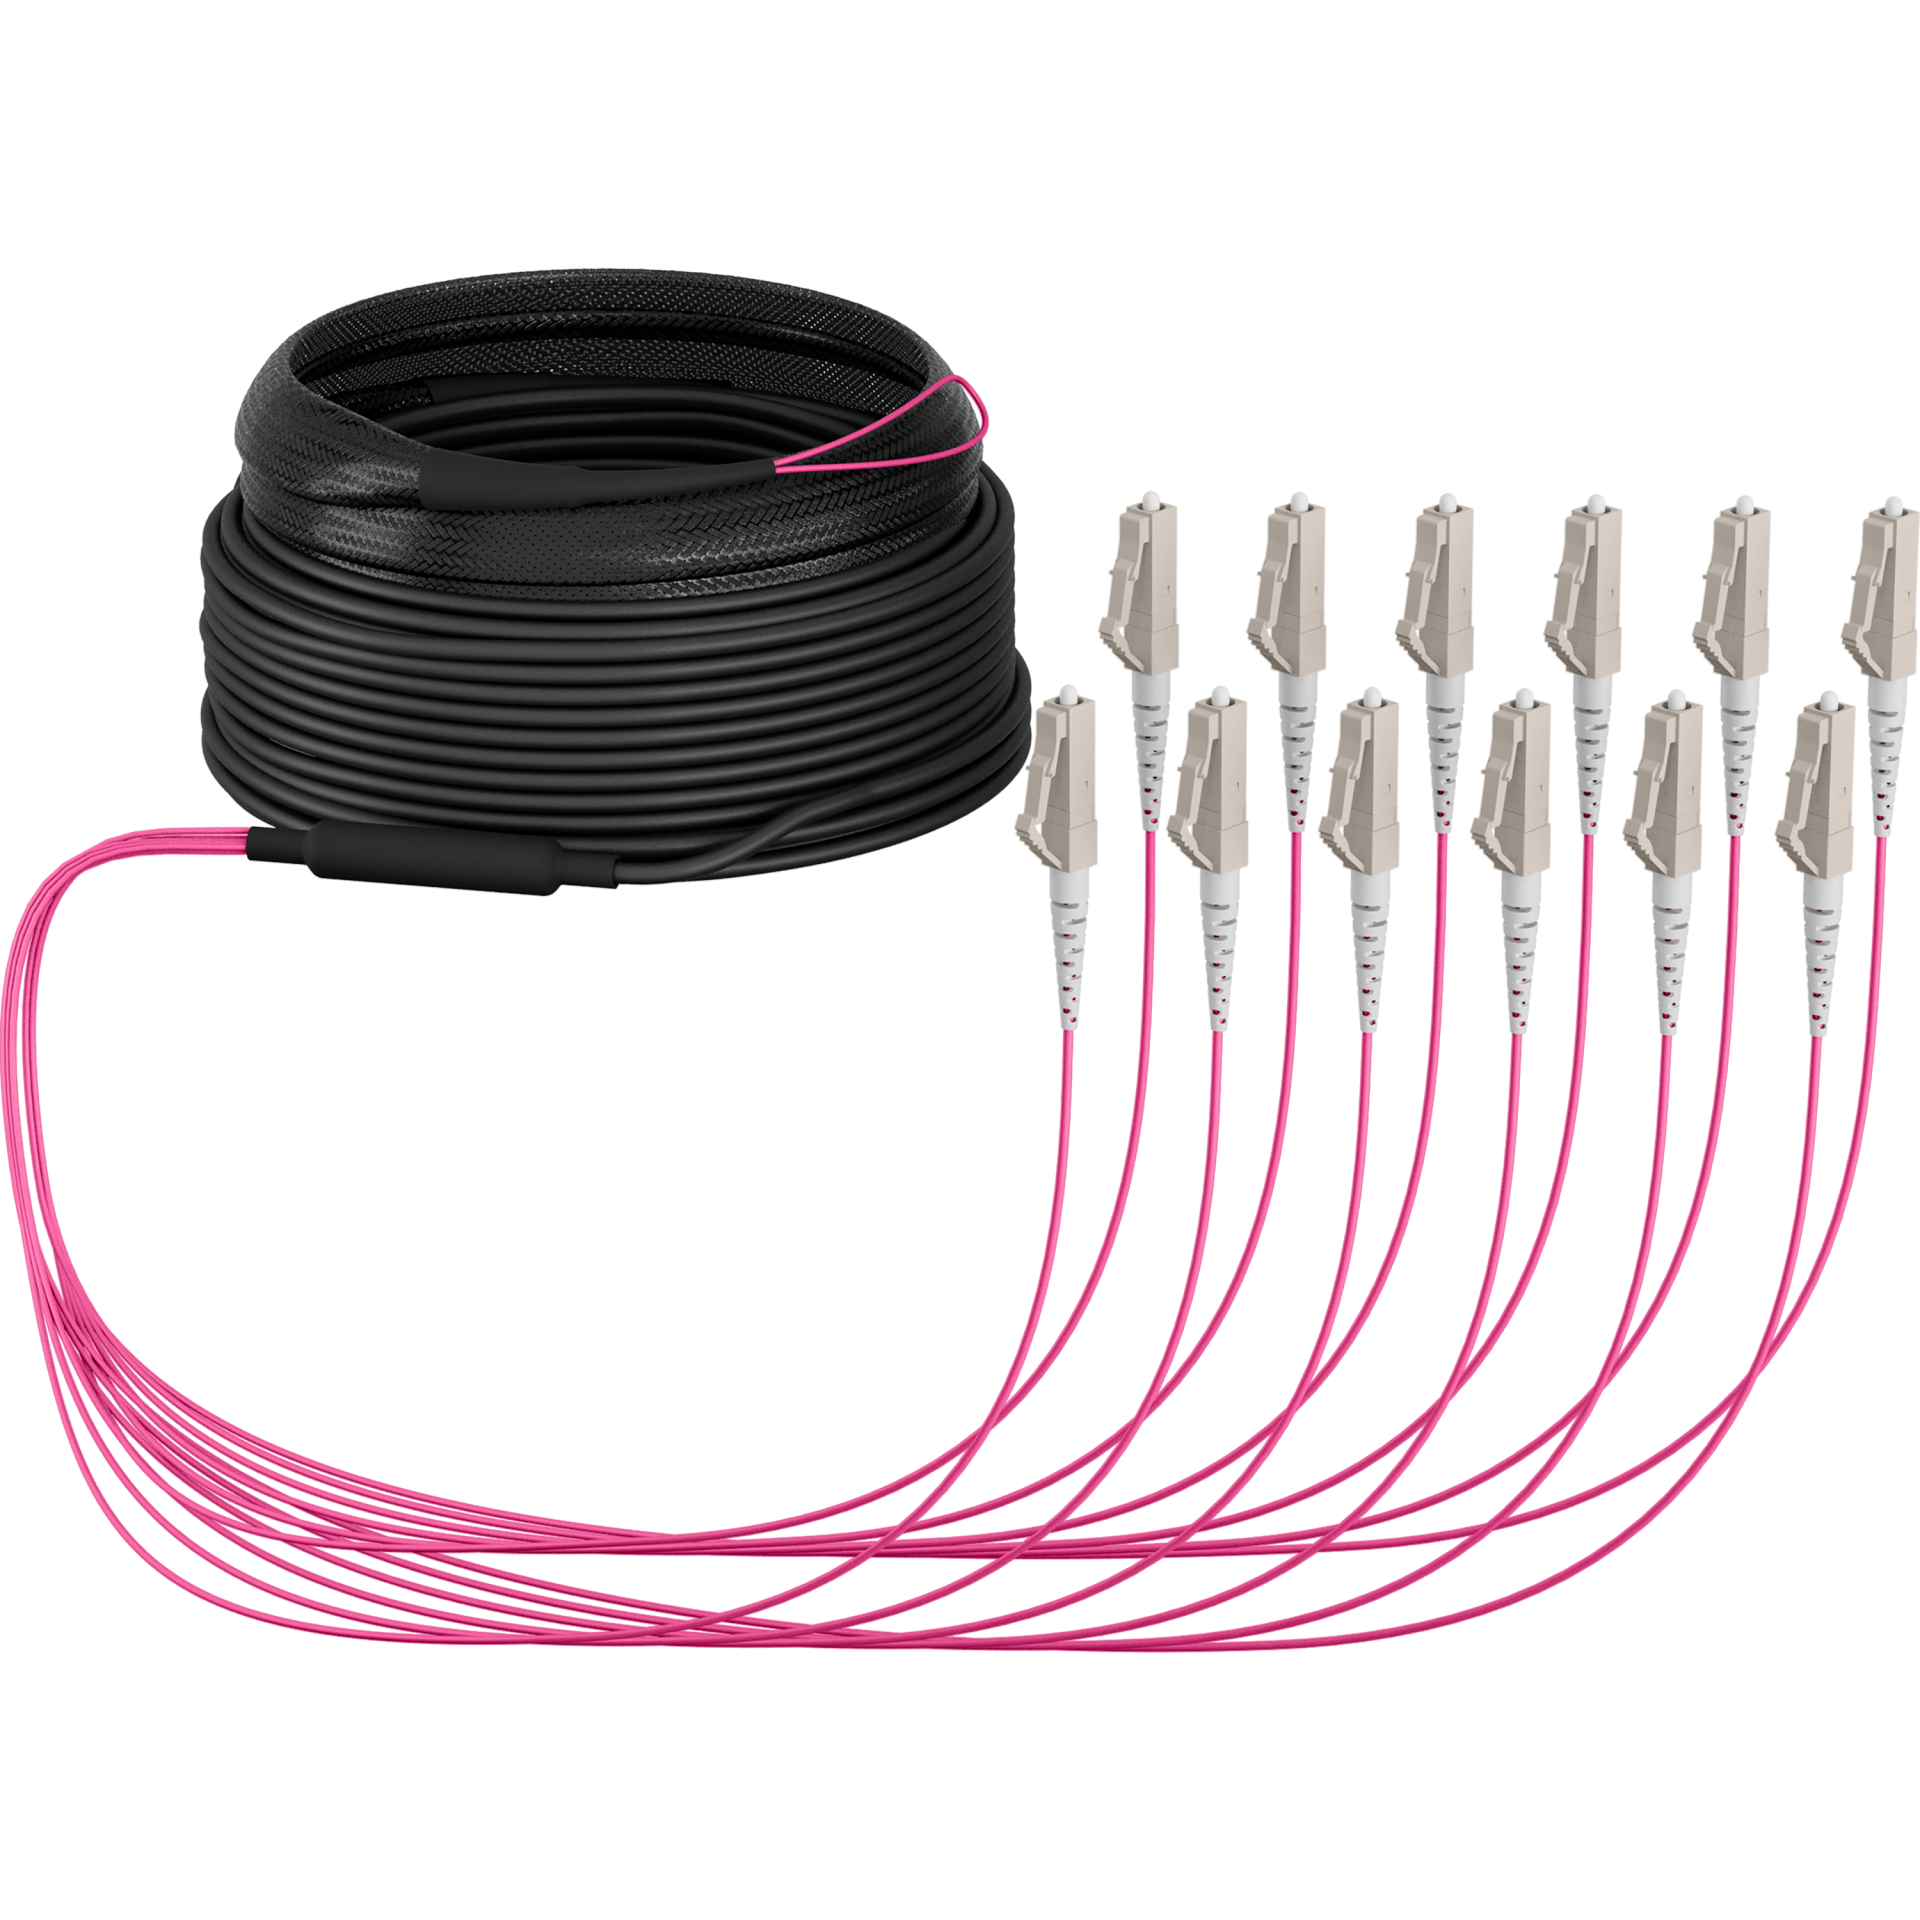 Trunkcable U-DQ(ZN)BH OM4 12G (1x12) LC-LC,30m Dca LSZH